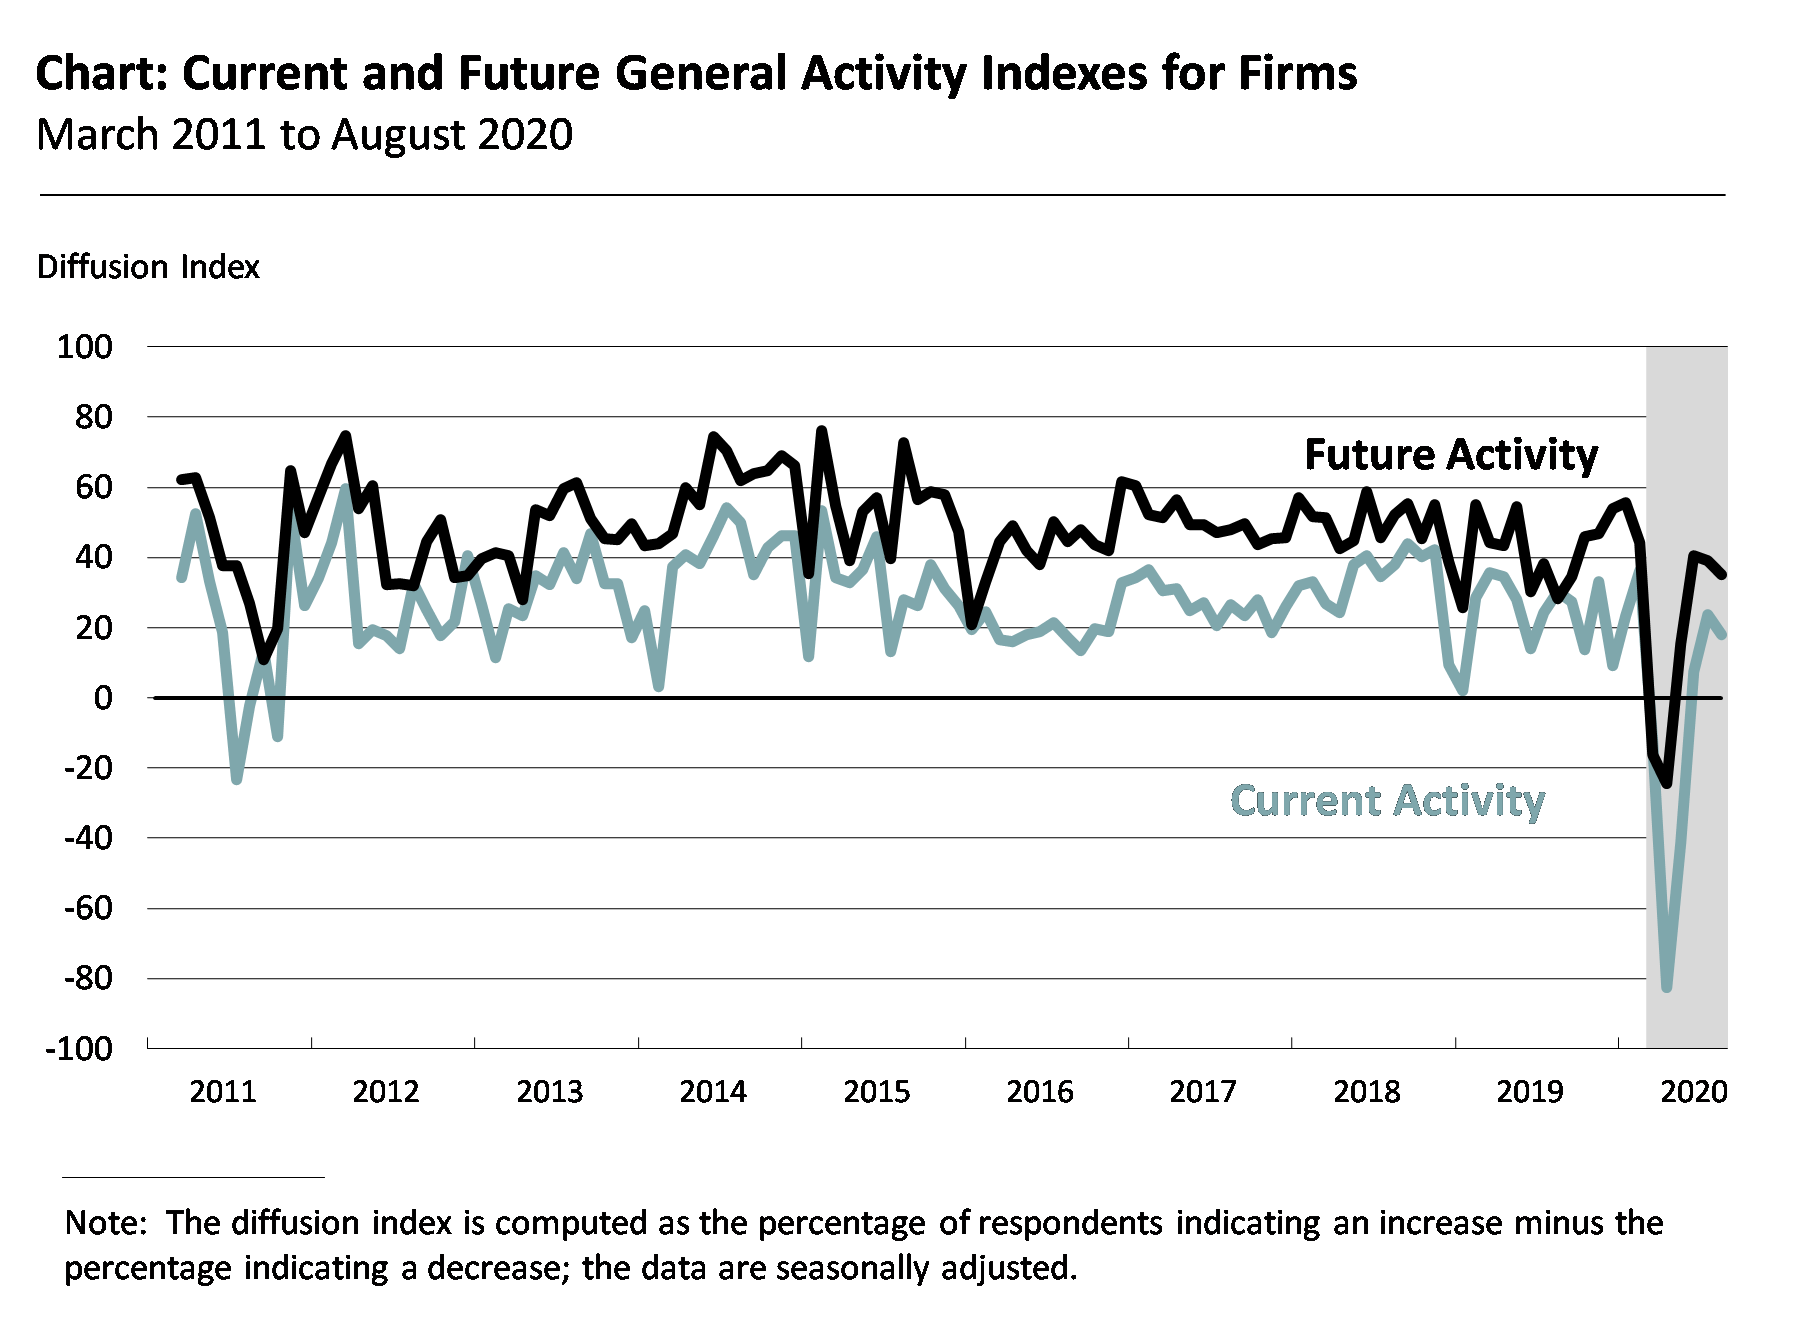 Current and Future General Activity Indexes for Firms